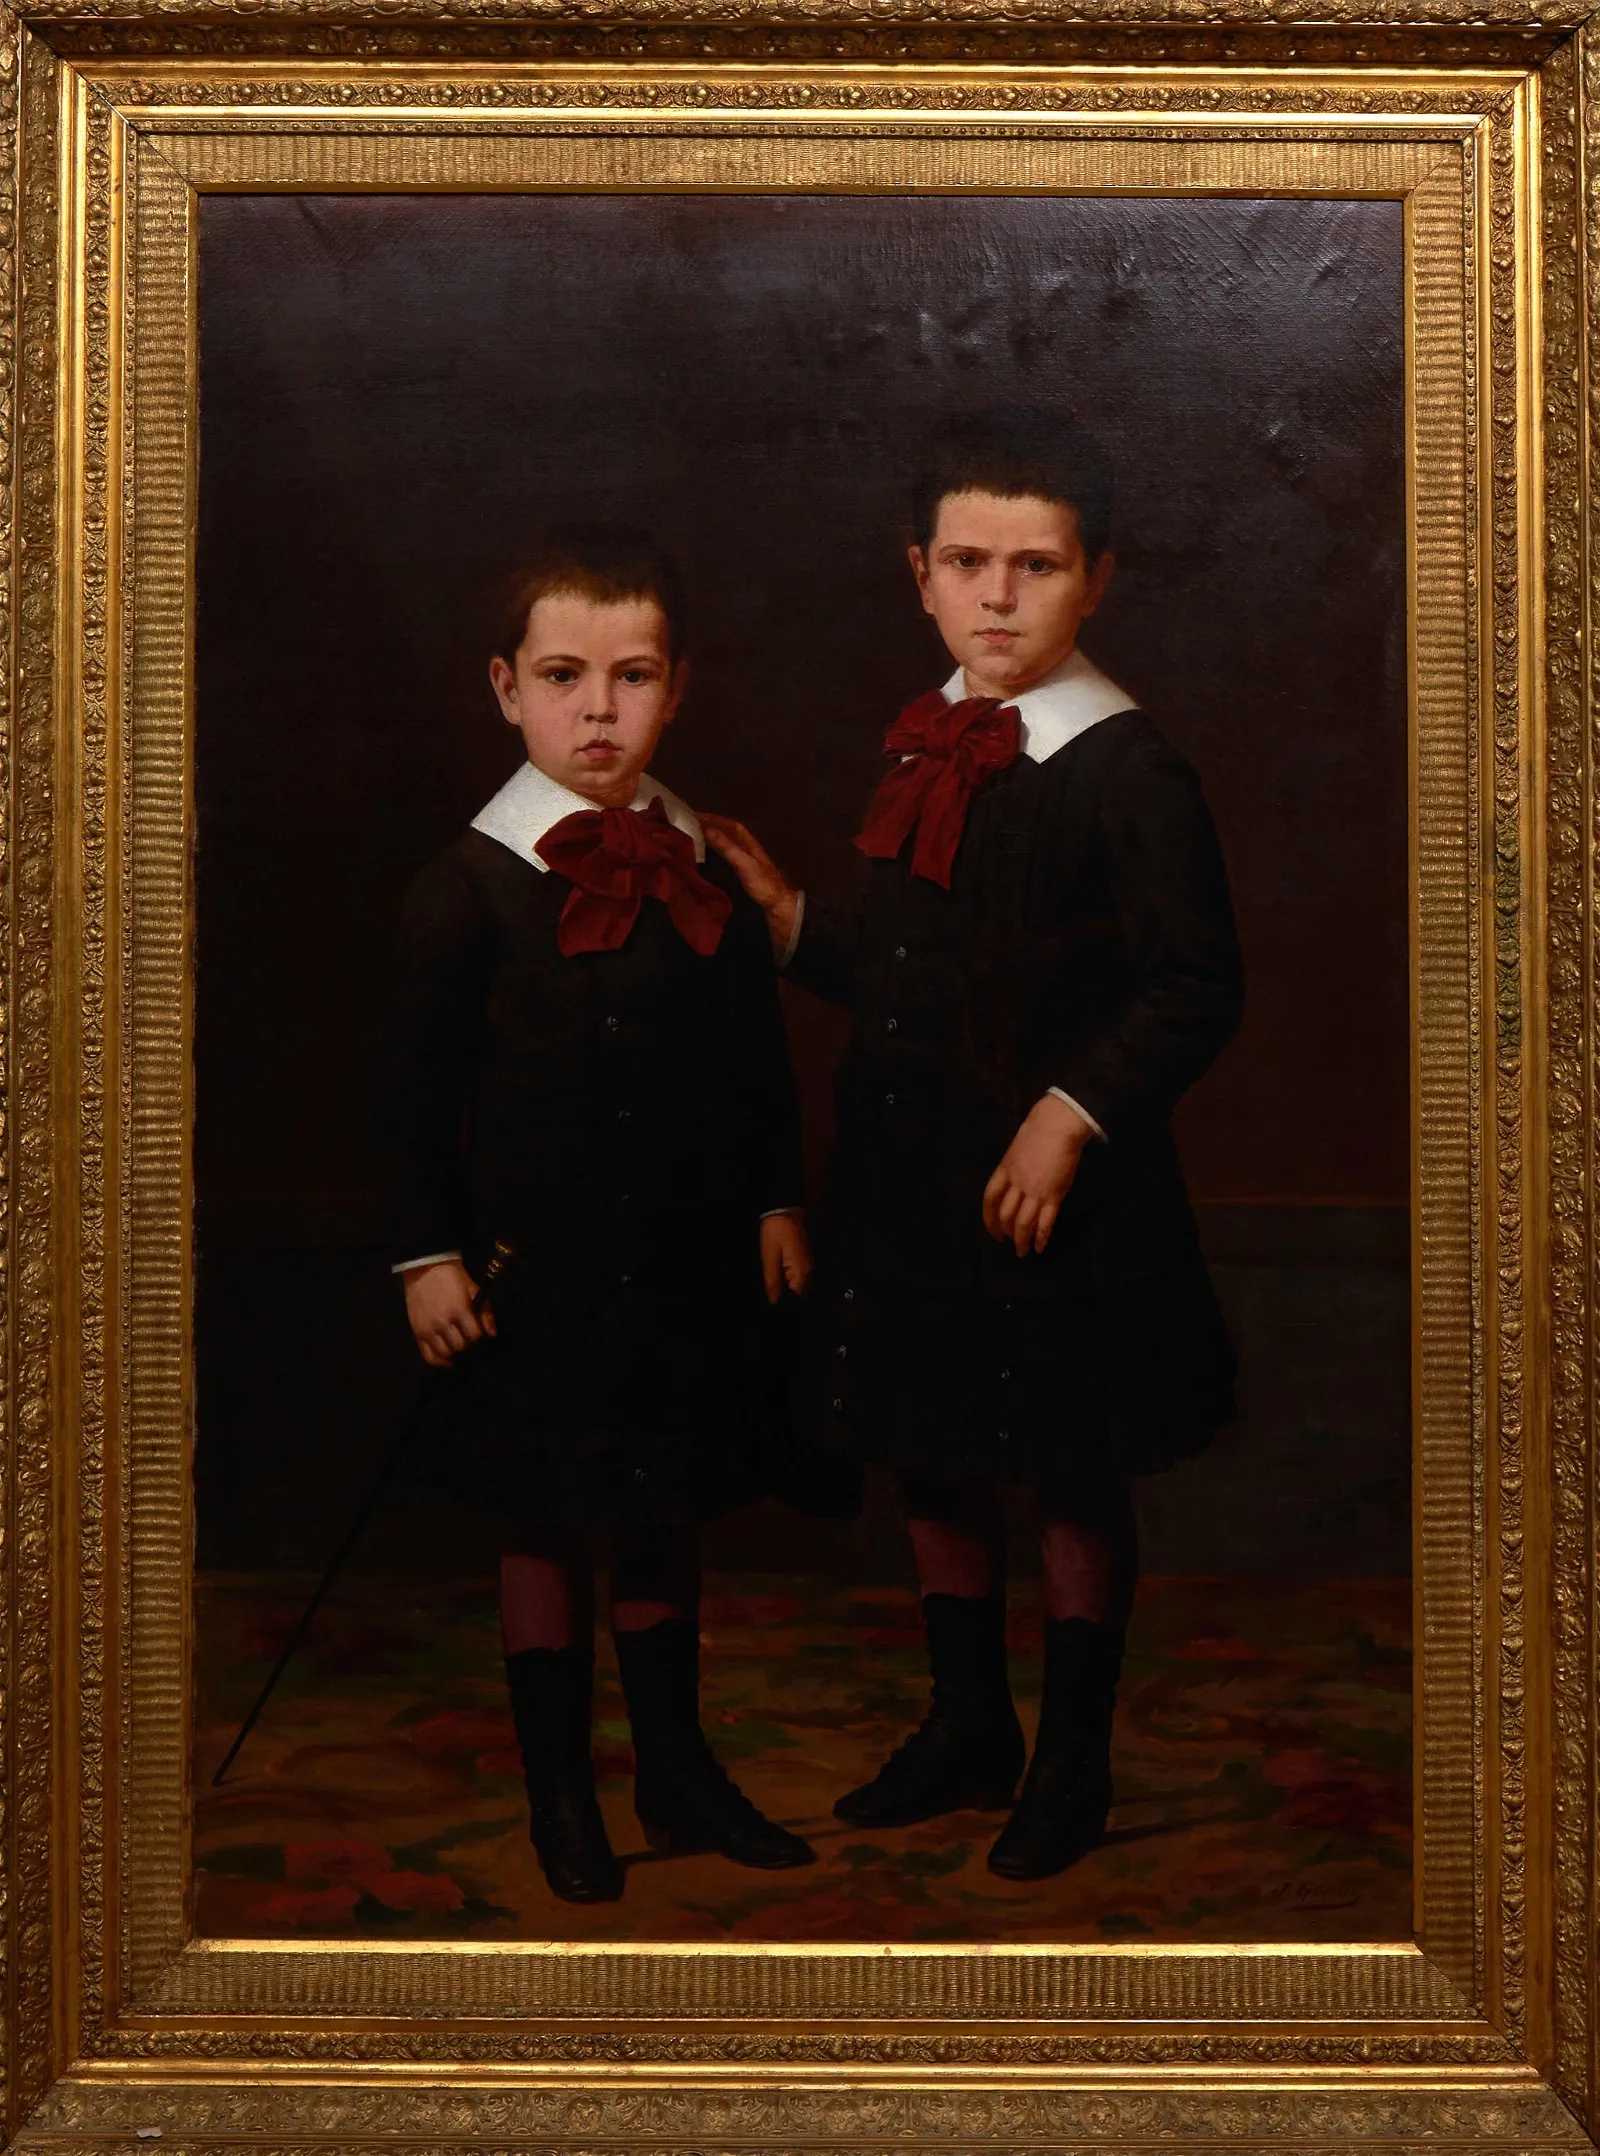 John Genin, 'Portrait of Paul Henri Augustin Capdevielle & Pierre Emmanuel 'Auguste' Capdevielle, Children of Paul Capedevielle, Former Mayor of New Orleans,' estimated at $4,000-$8,000 at Crescent City Auction Gallery.